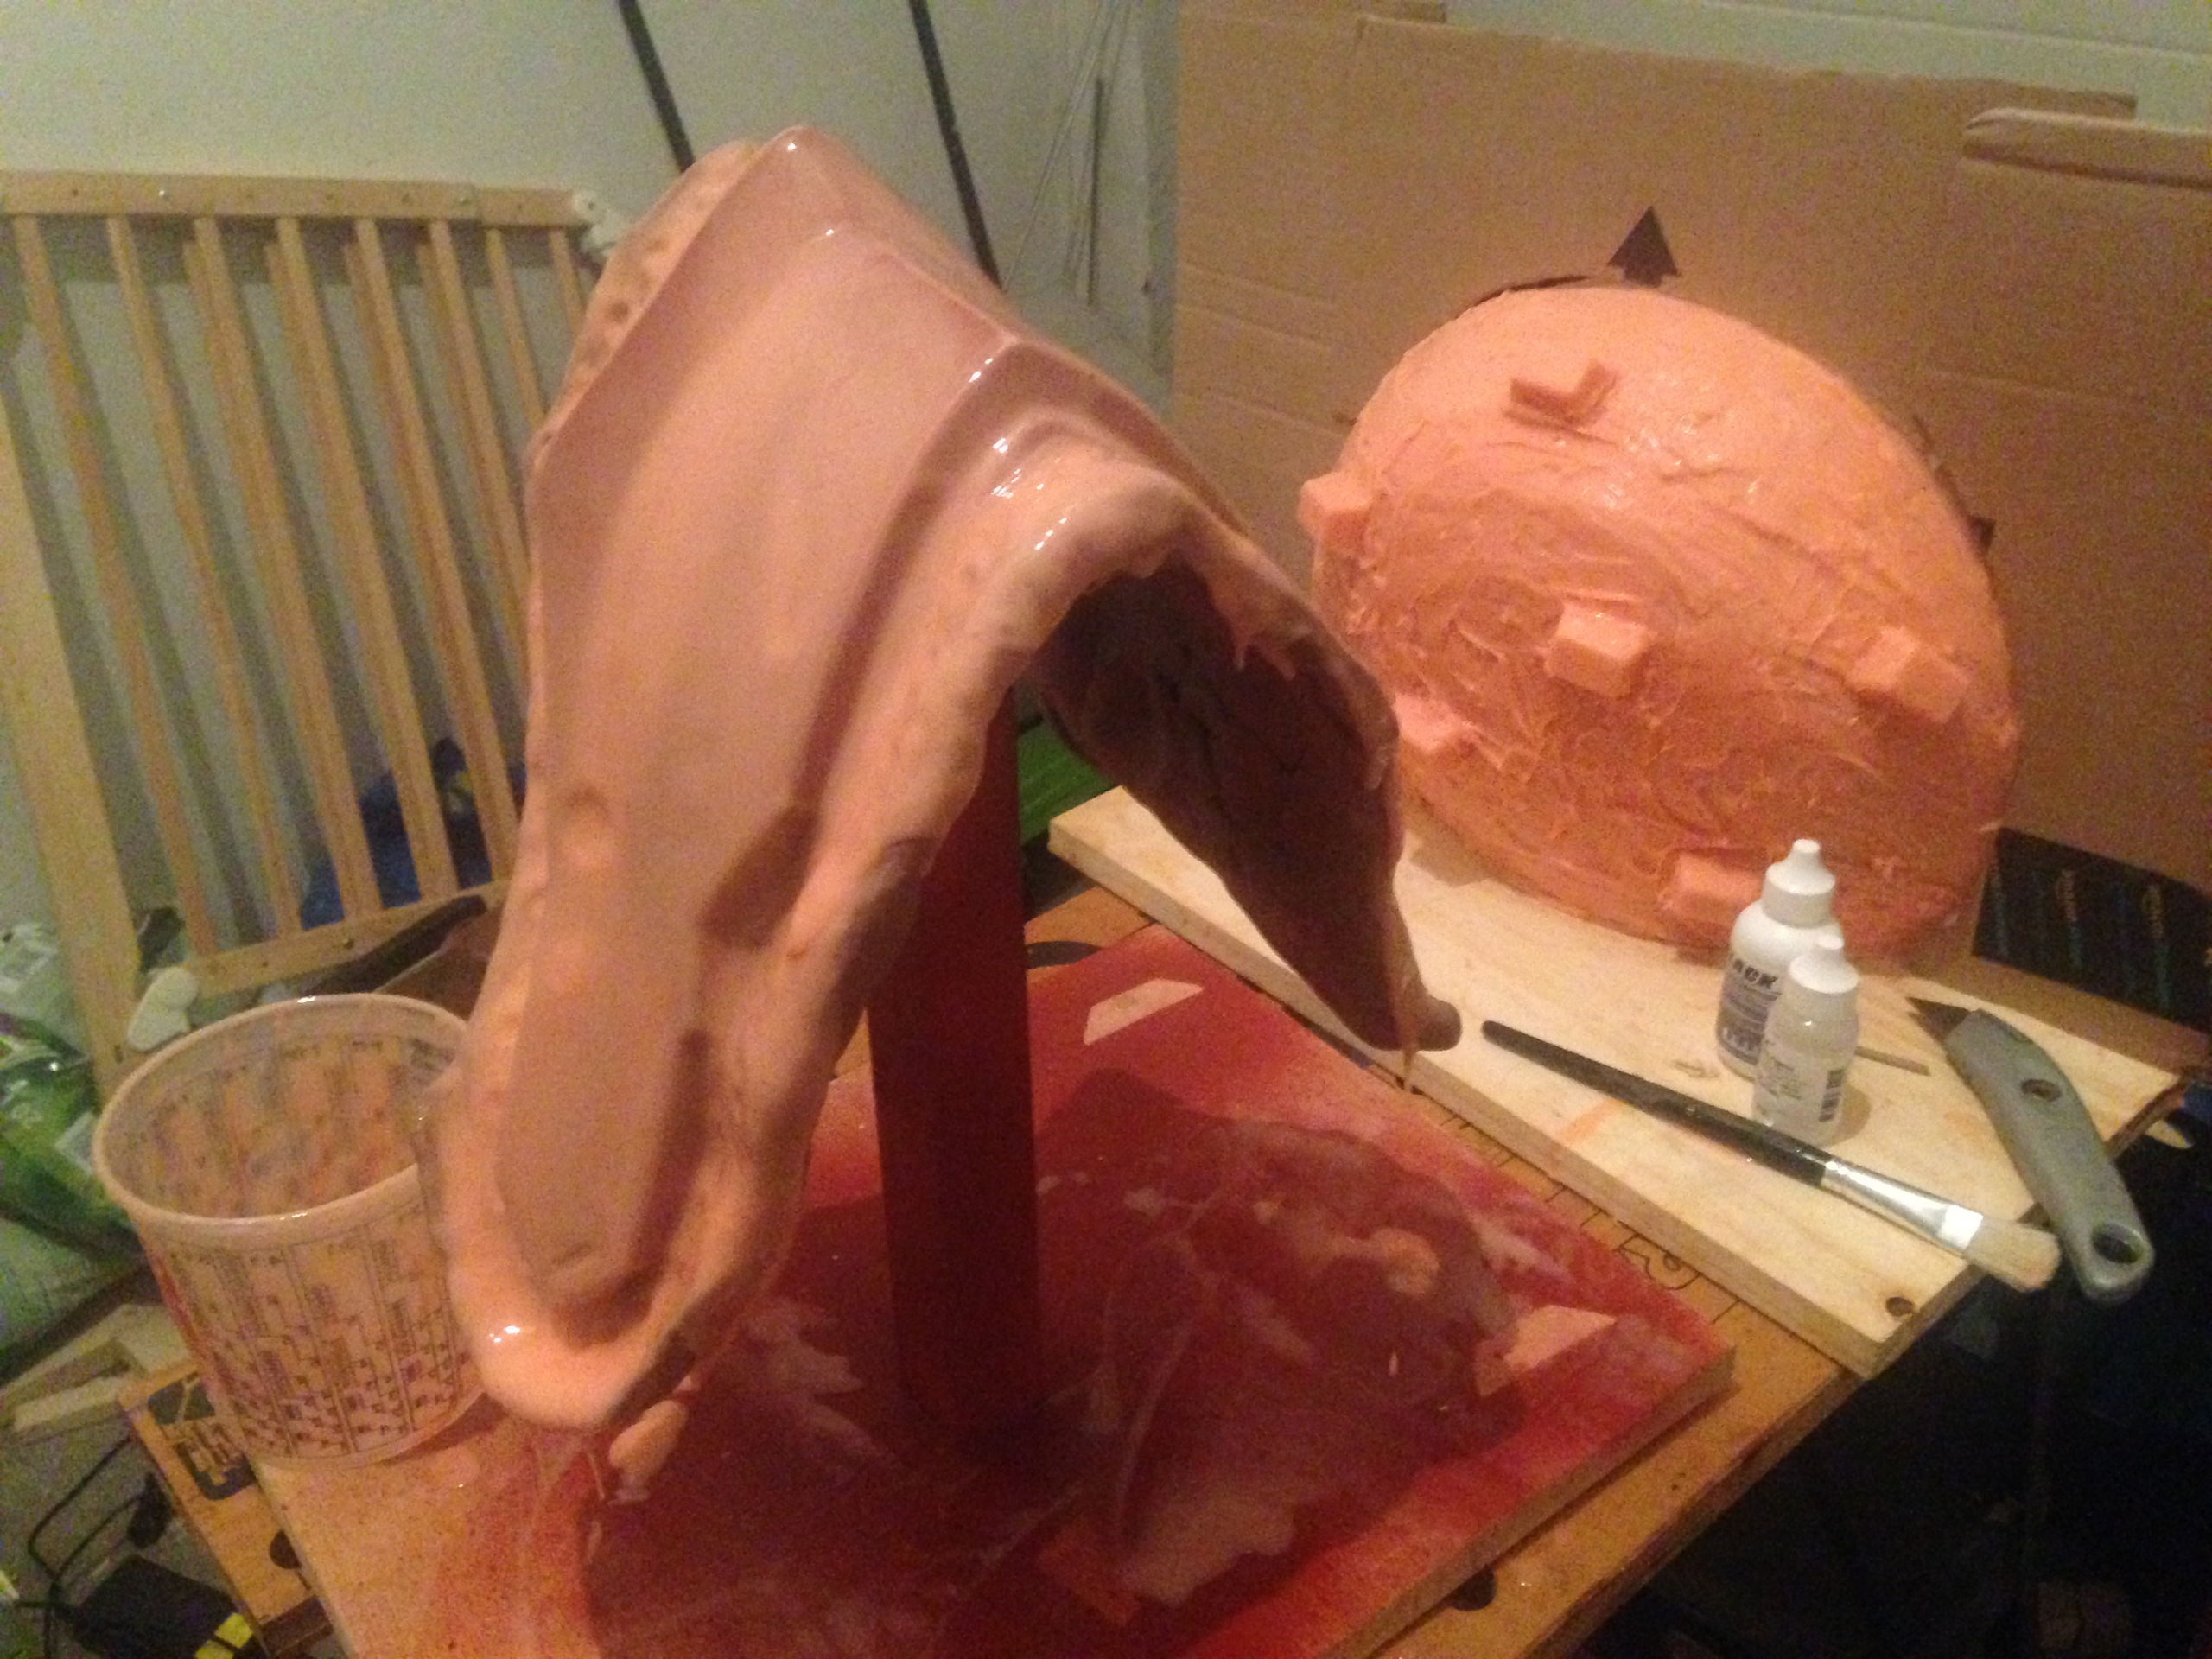 For the other parts, I created brushed-on mold. Very messy but more practical for big objects and use a lot less silicone